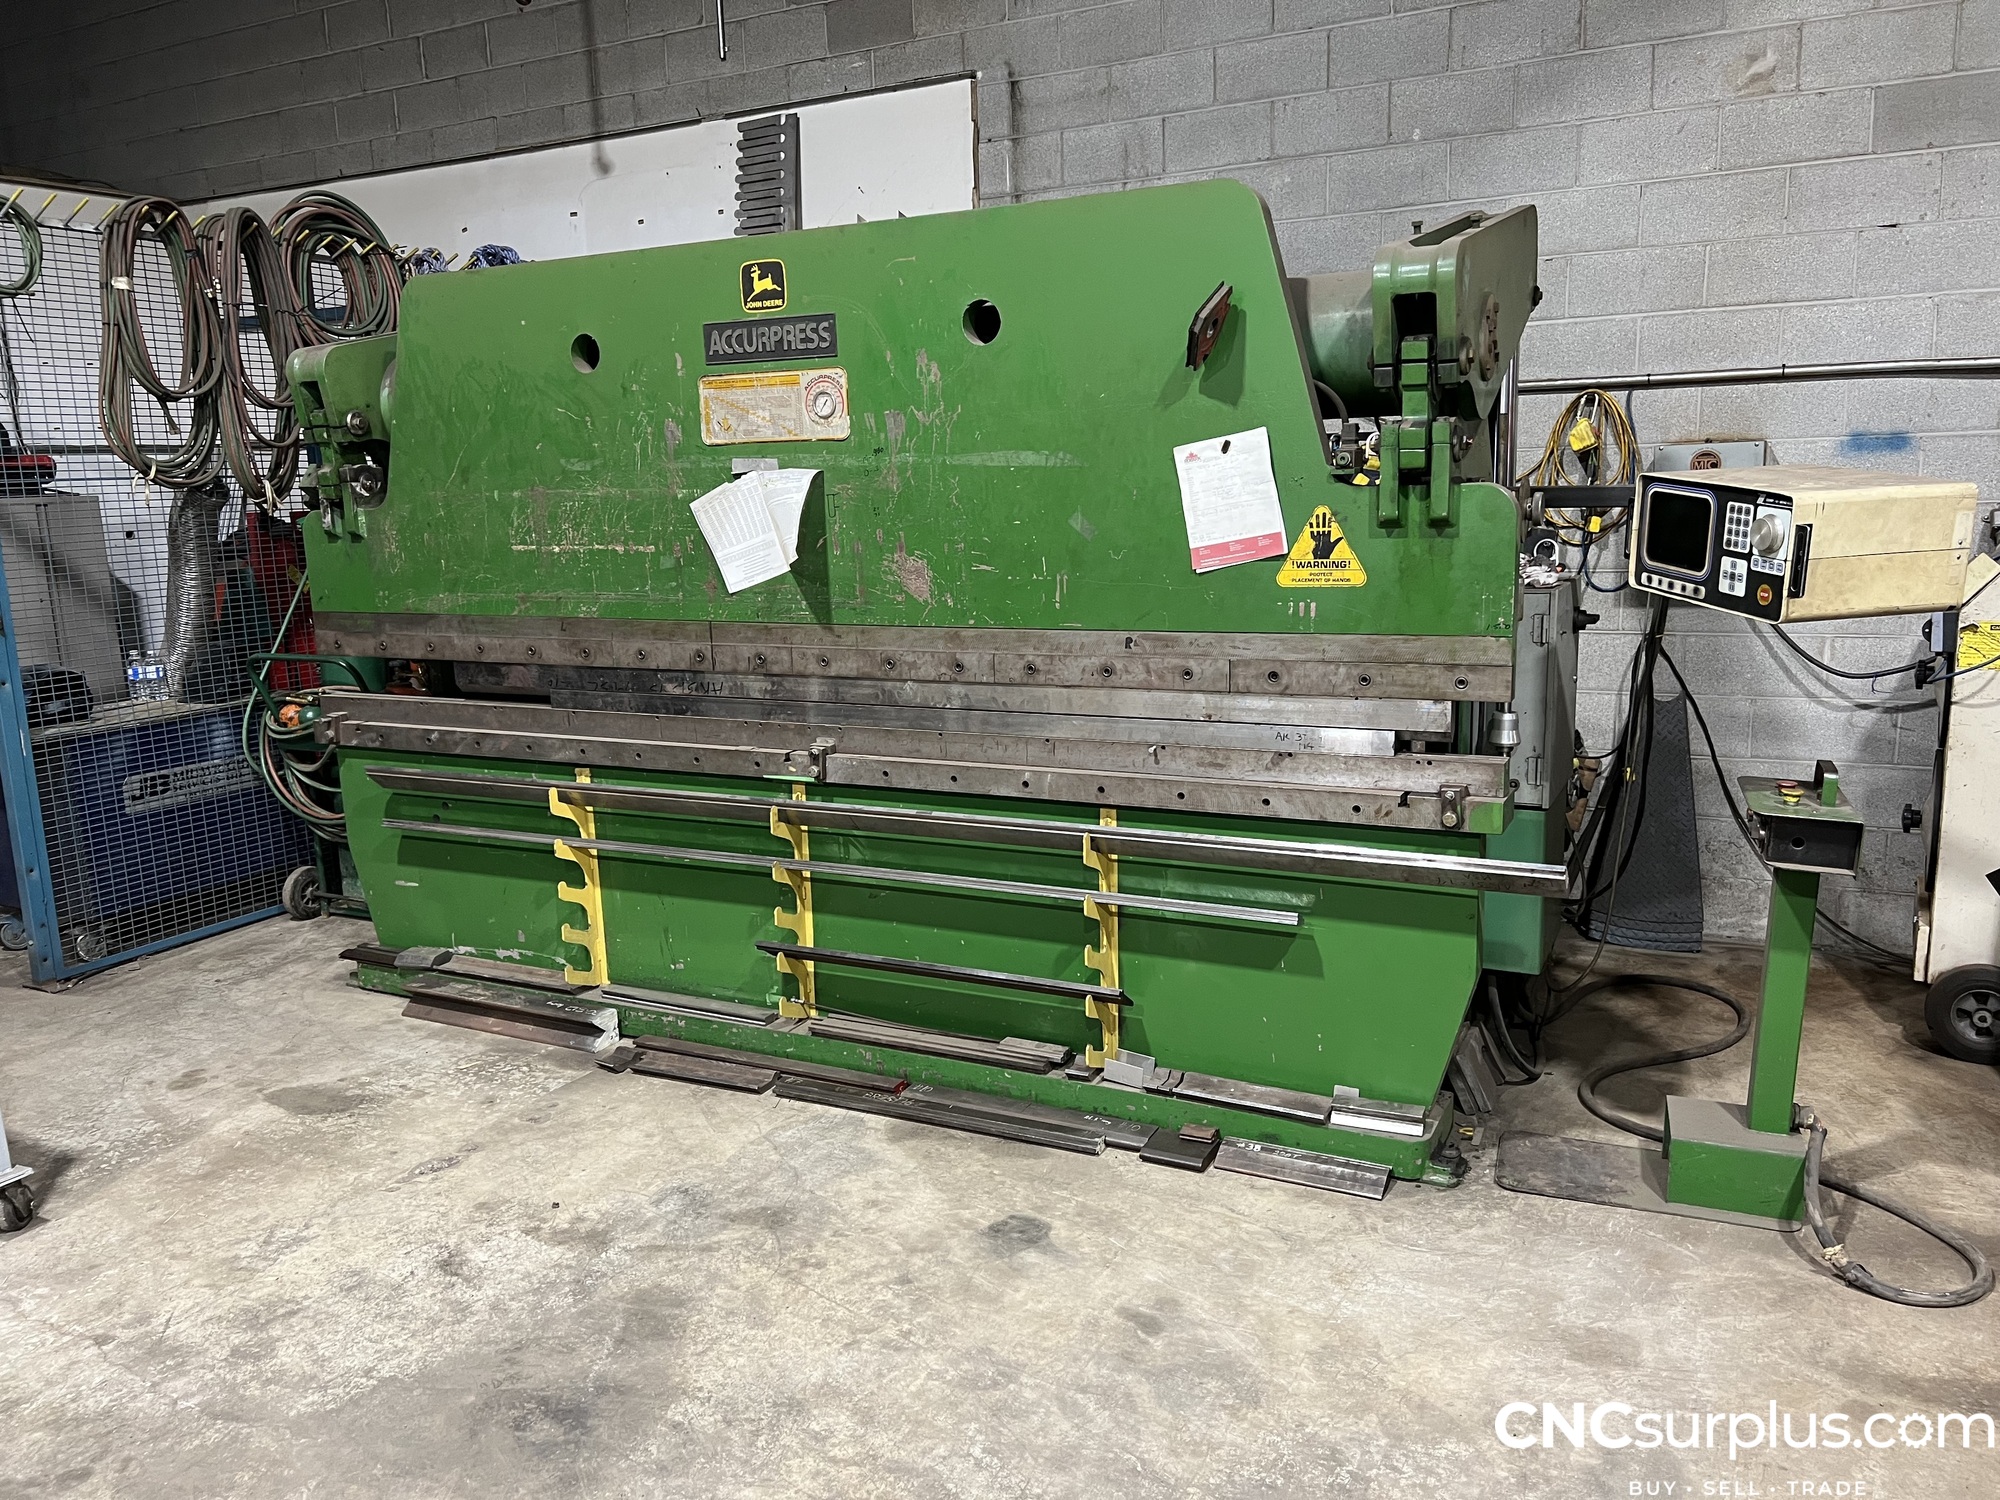 1992 ACCURPRESS 713012 Press Brakes | CNCsurplus, A Div. of Comtex Leasing Corp.